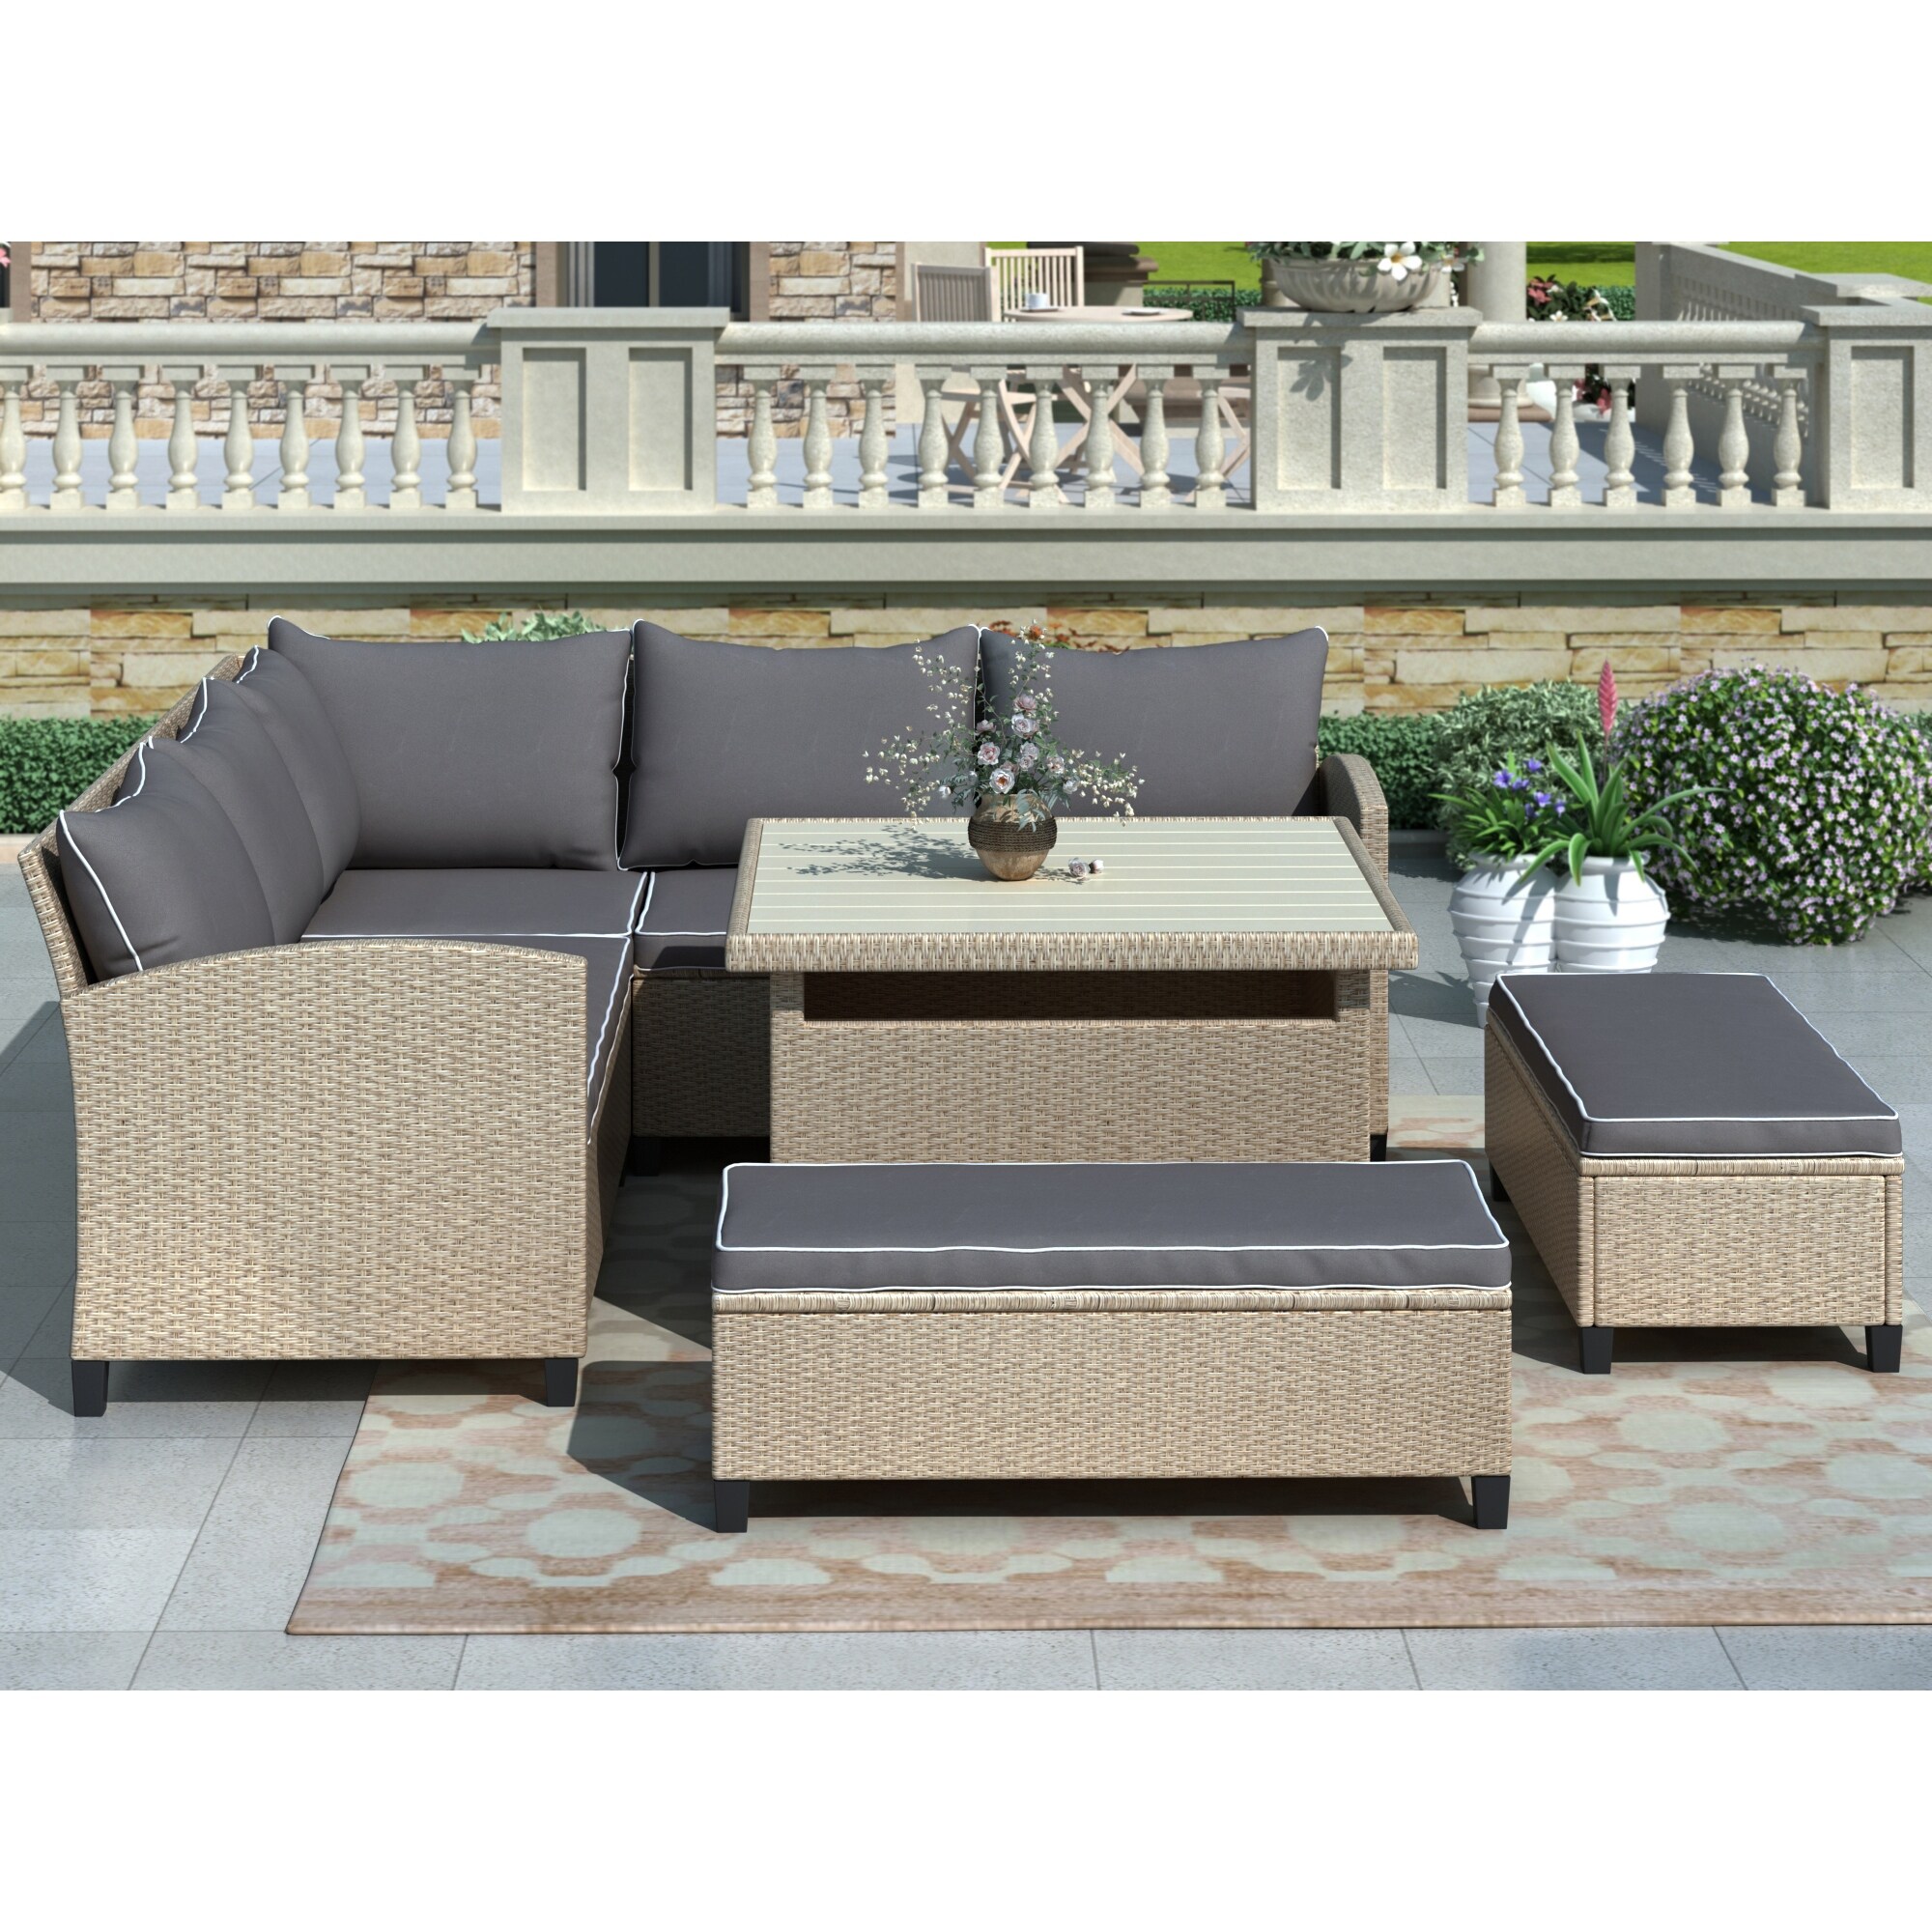 6-piece Patio Furniture Set Outdoor Wicker Rattan Sectional Sofa With Table And Benches